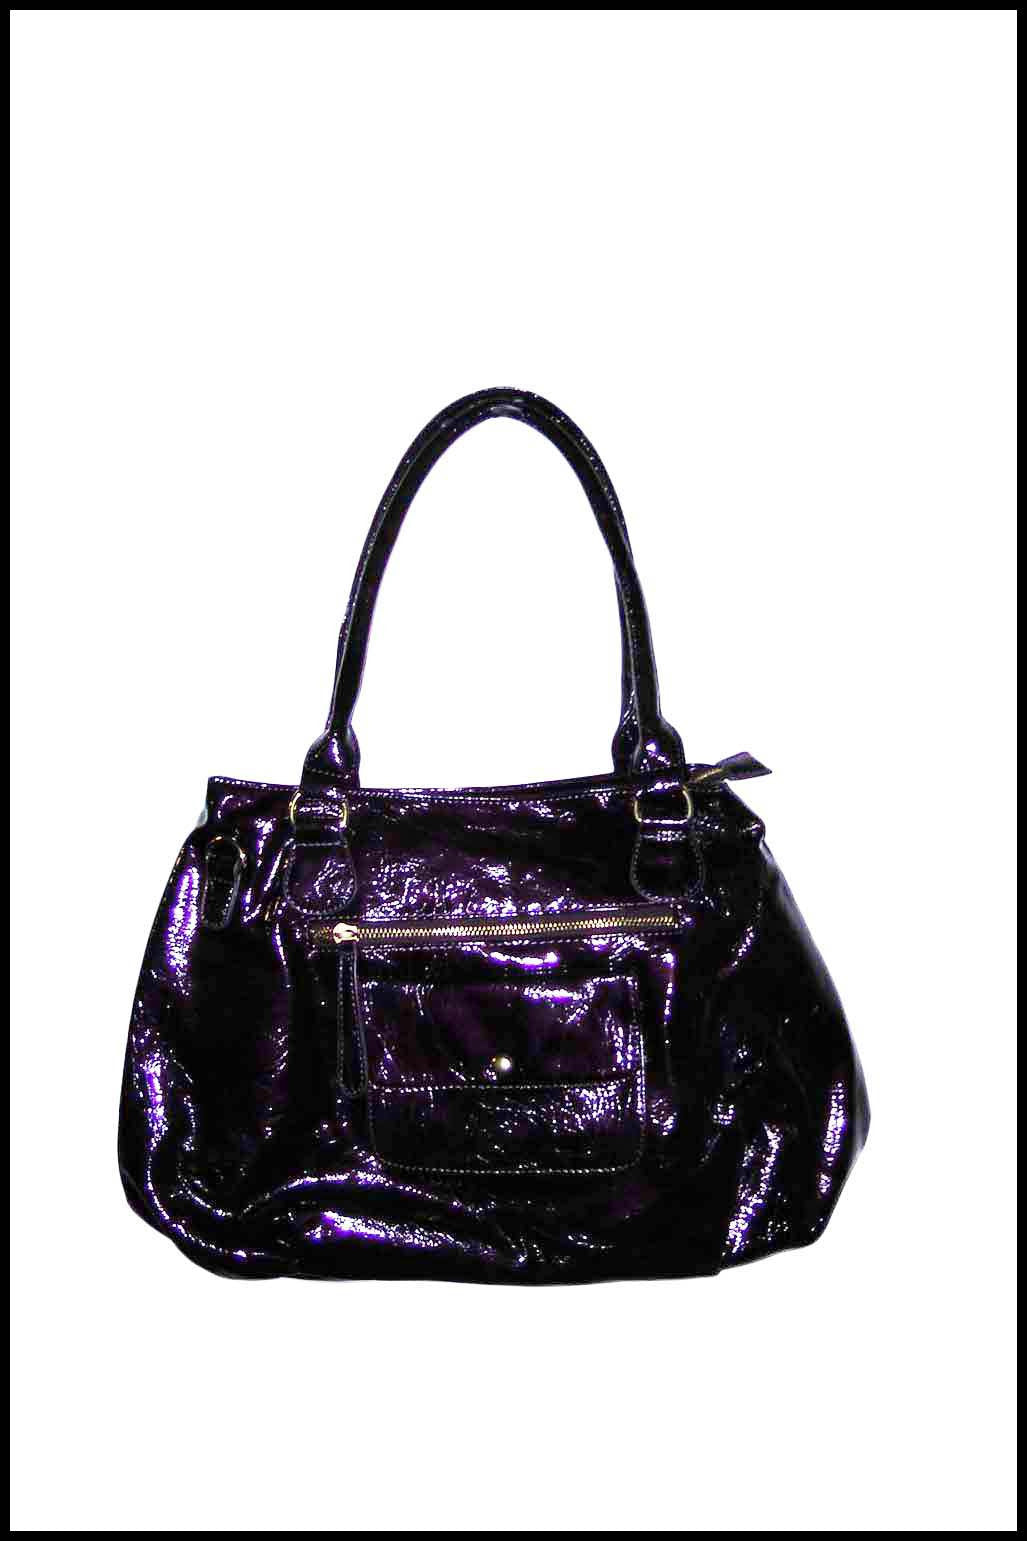 Distressed Patent Handbag with Front Pocket and Double Handles